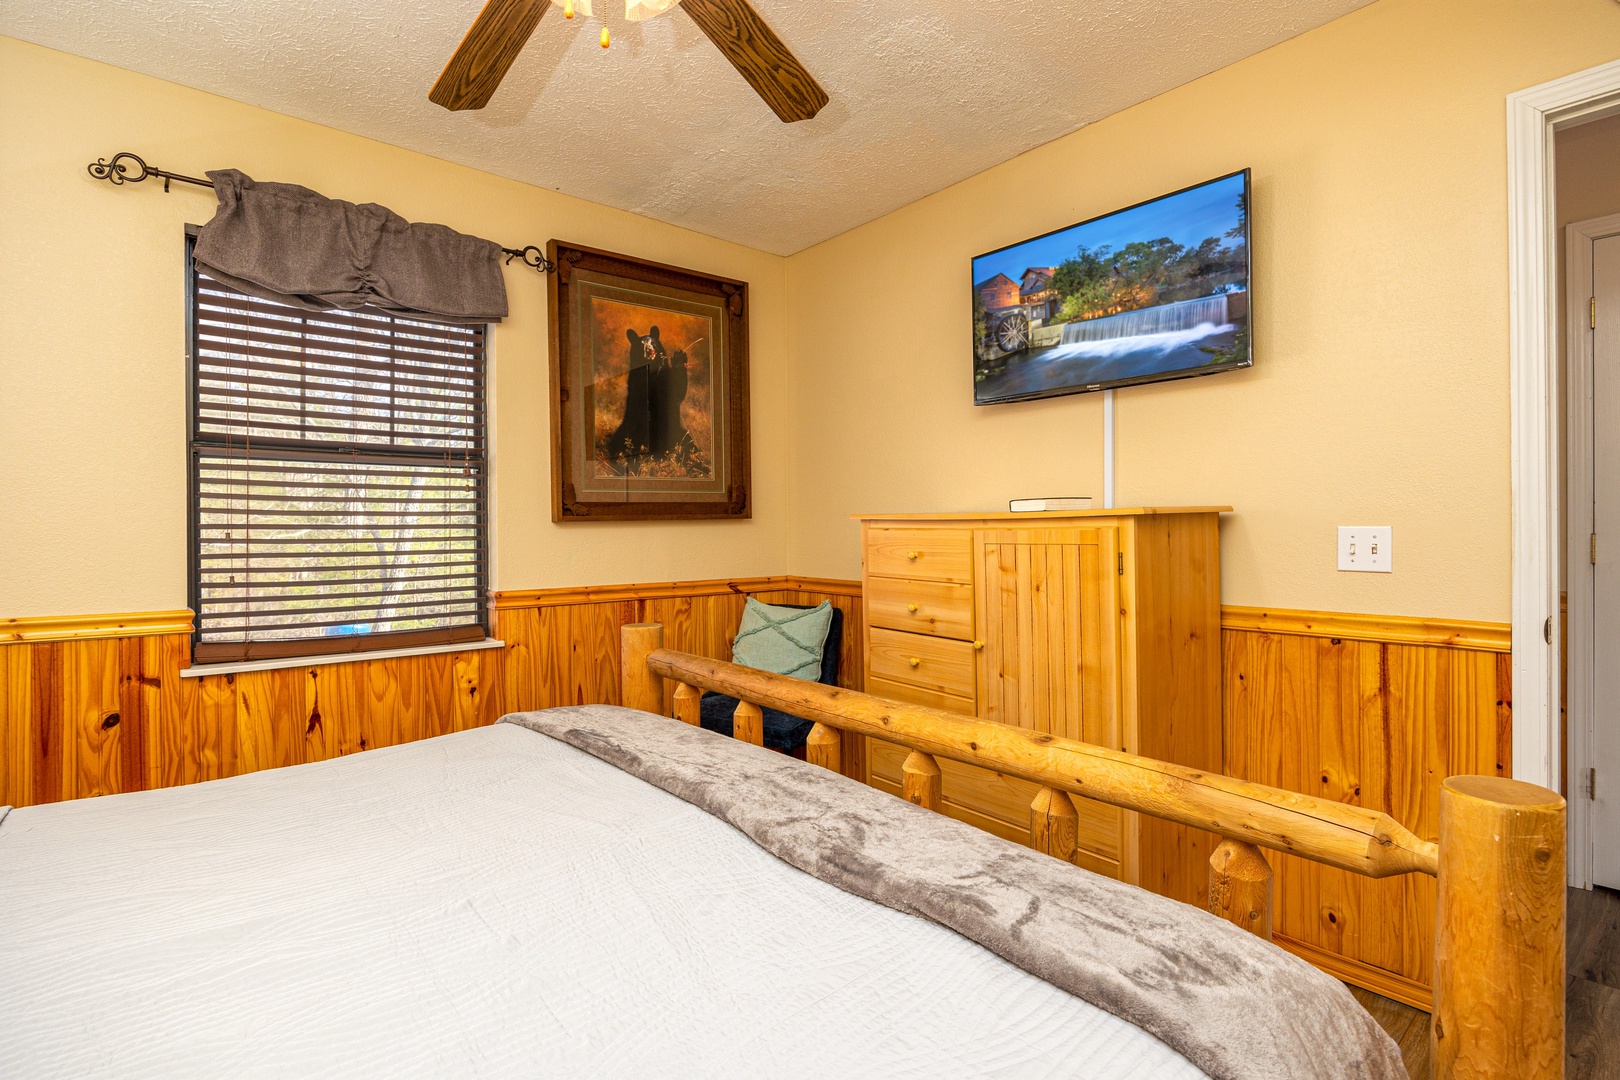 Bedroom amenities at Liam's Lookout, a 2 bedroom cabin rental located in Pigeon Forge